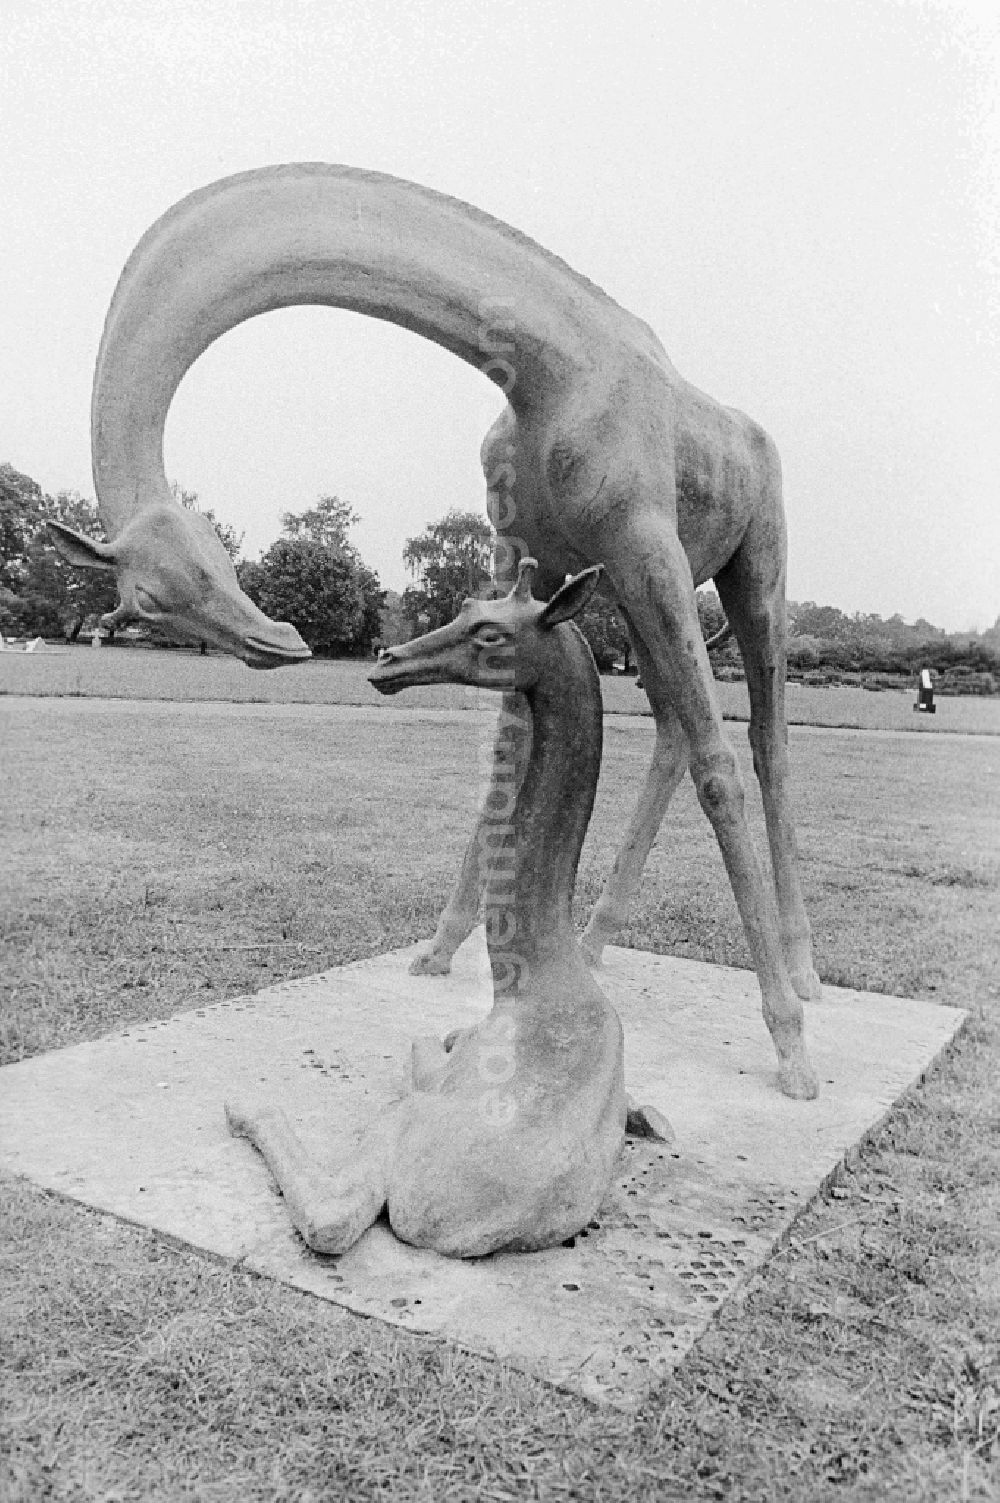 GDR picture archive: Berlin - Two giraffes - plastic of German sculptor Hans-Detlev Henning in the Treptower park in Berlin, the former capital of the GDR, German democratic republic